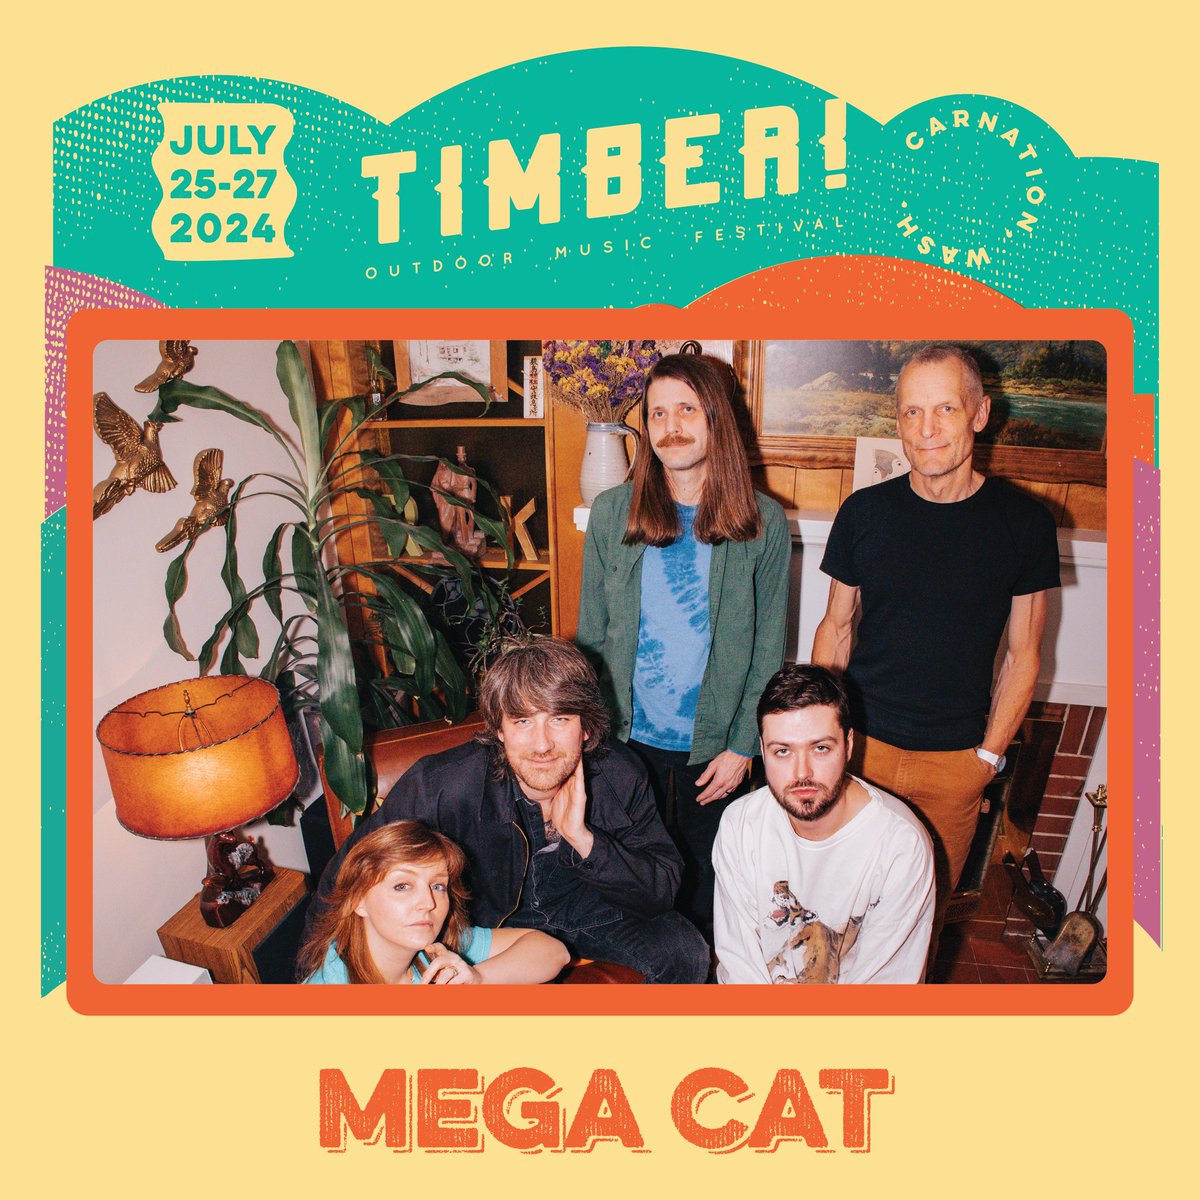 mega cat will get you moving and grooving beneath the starry Carnation skies. Catch them at Timber! on Saturday, July 27. Tickets on sale at timbermusicfest.com. 🌀